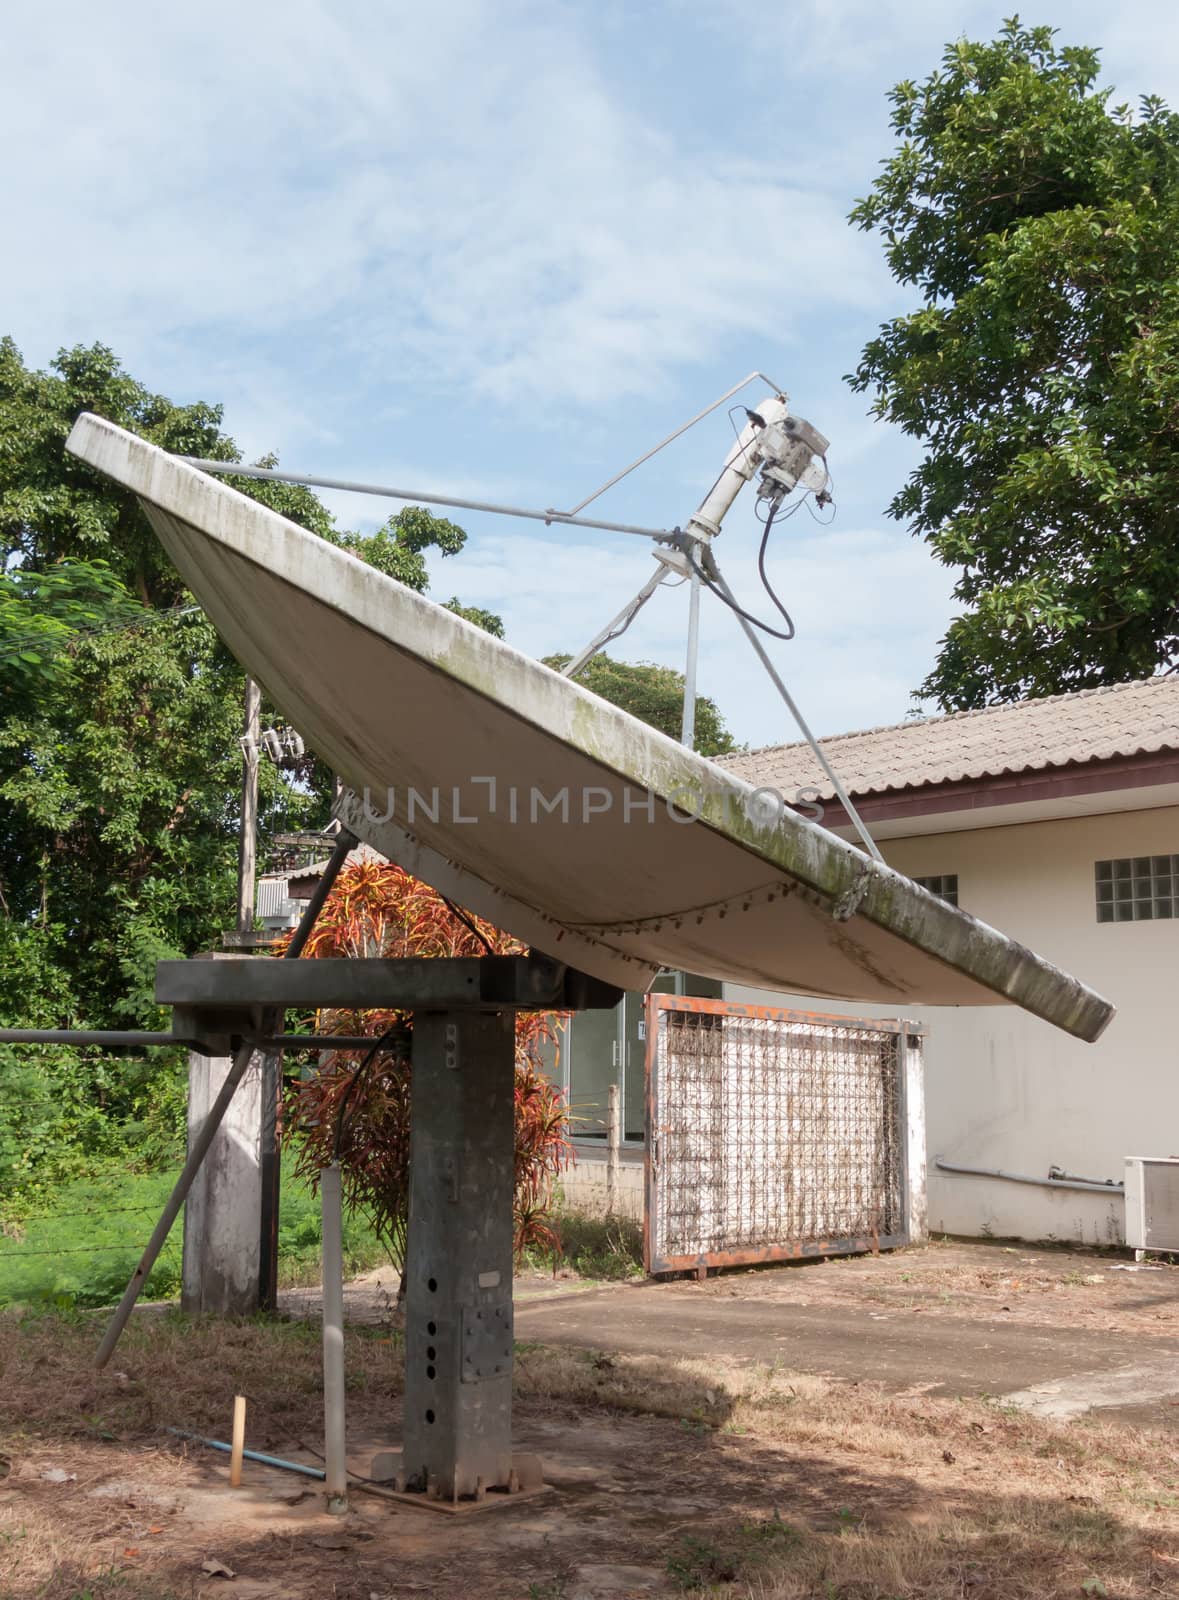 Large antenna dish on the ground at television and radio station